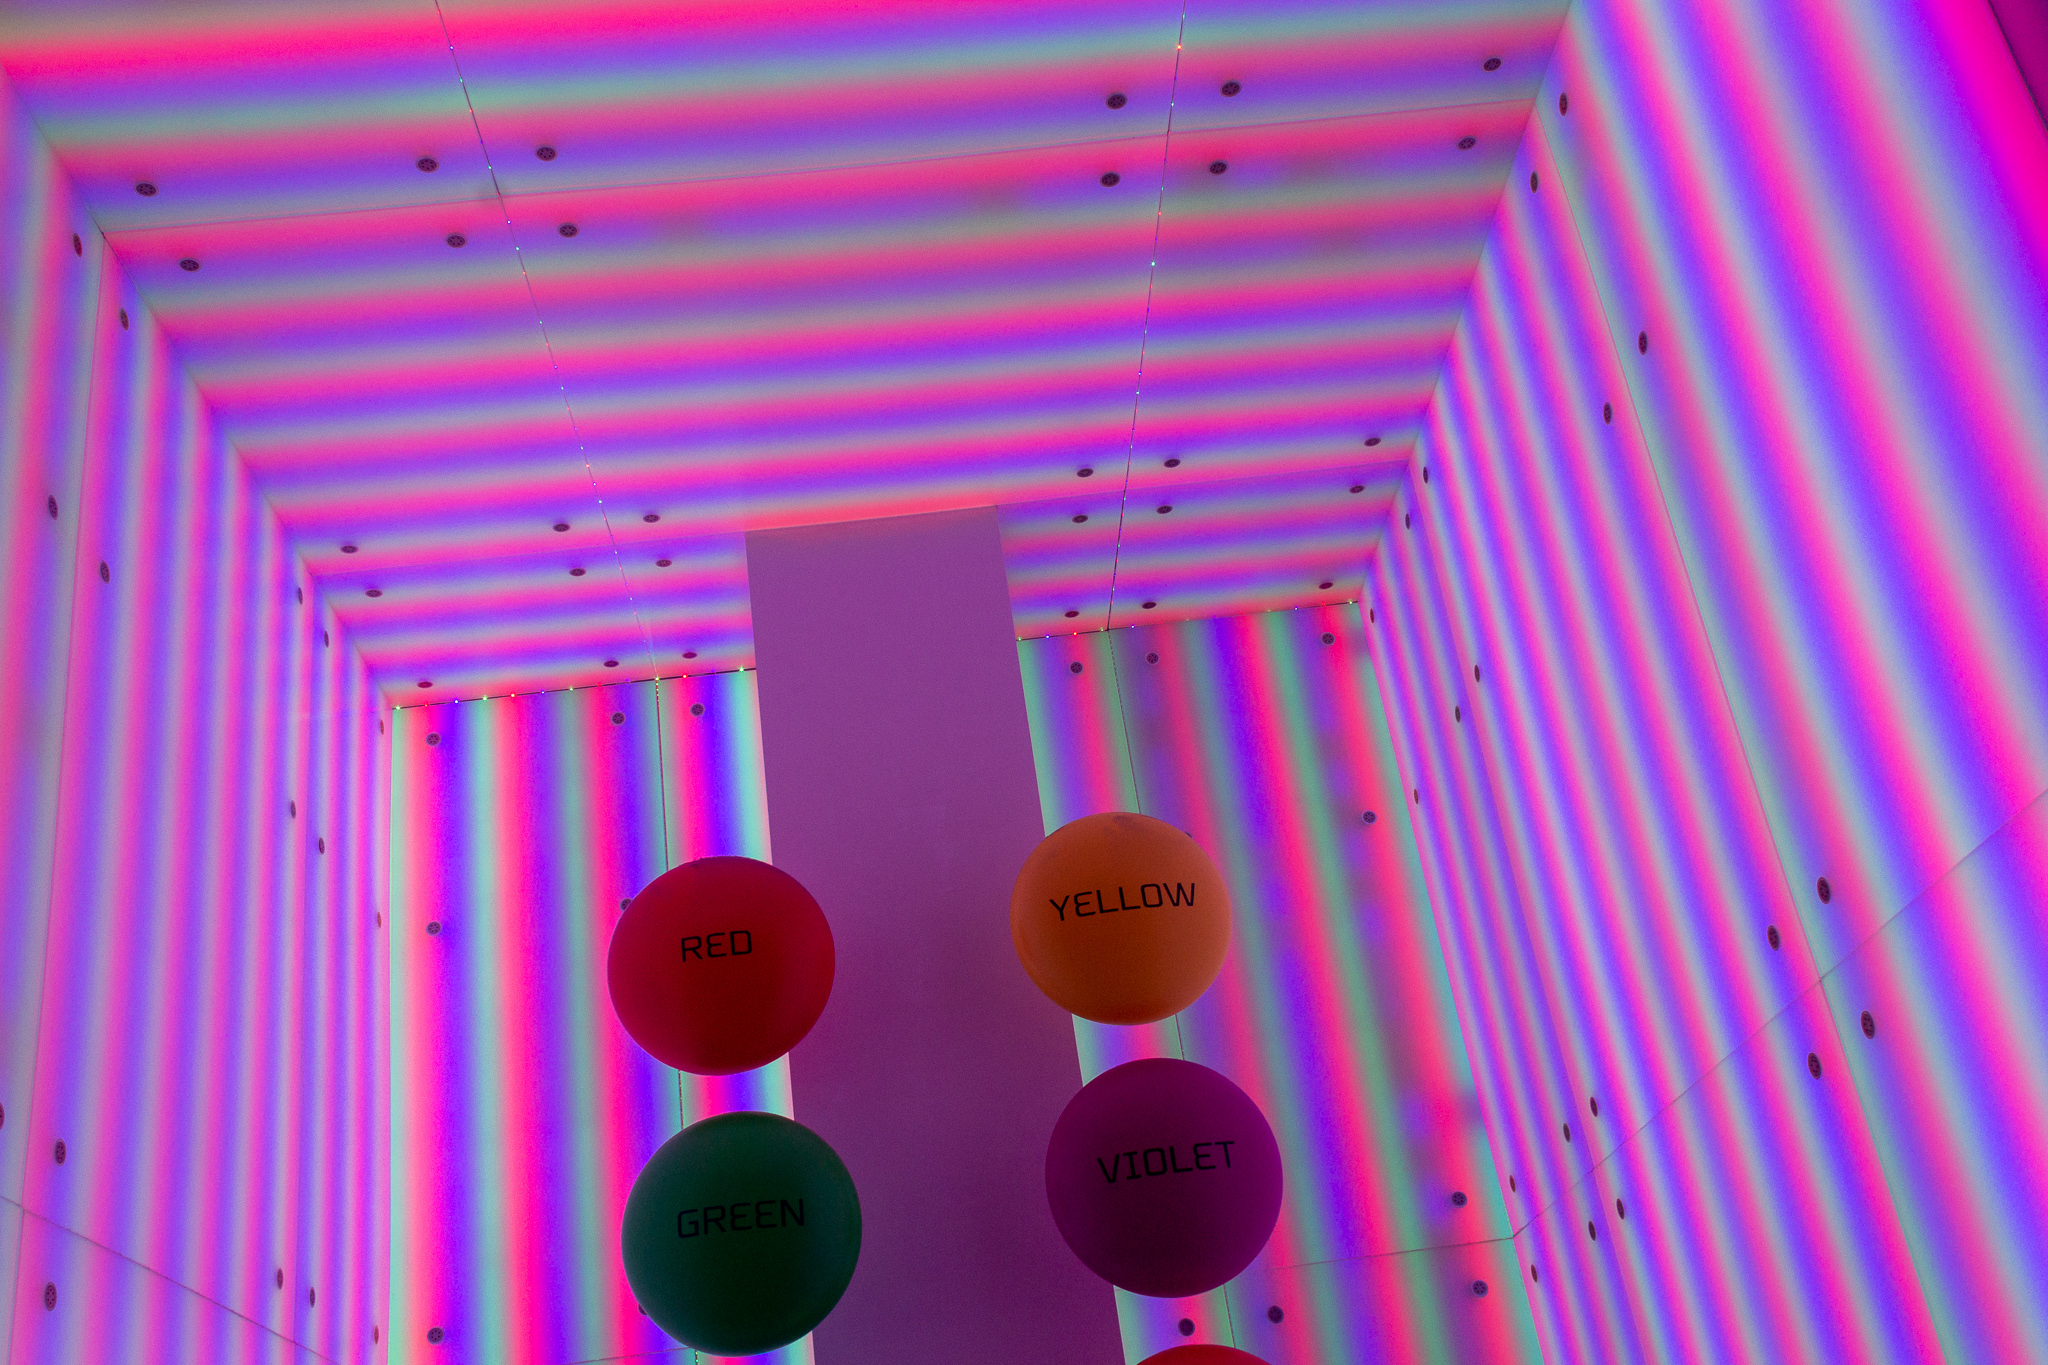 Top corners of square room lined with pink, green and yellow stripes of light with large circles labeled with different color names lined down the middle